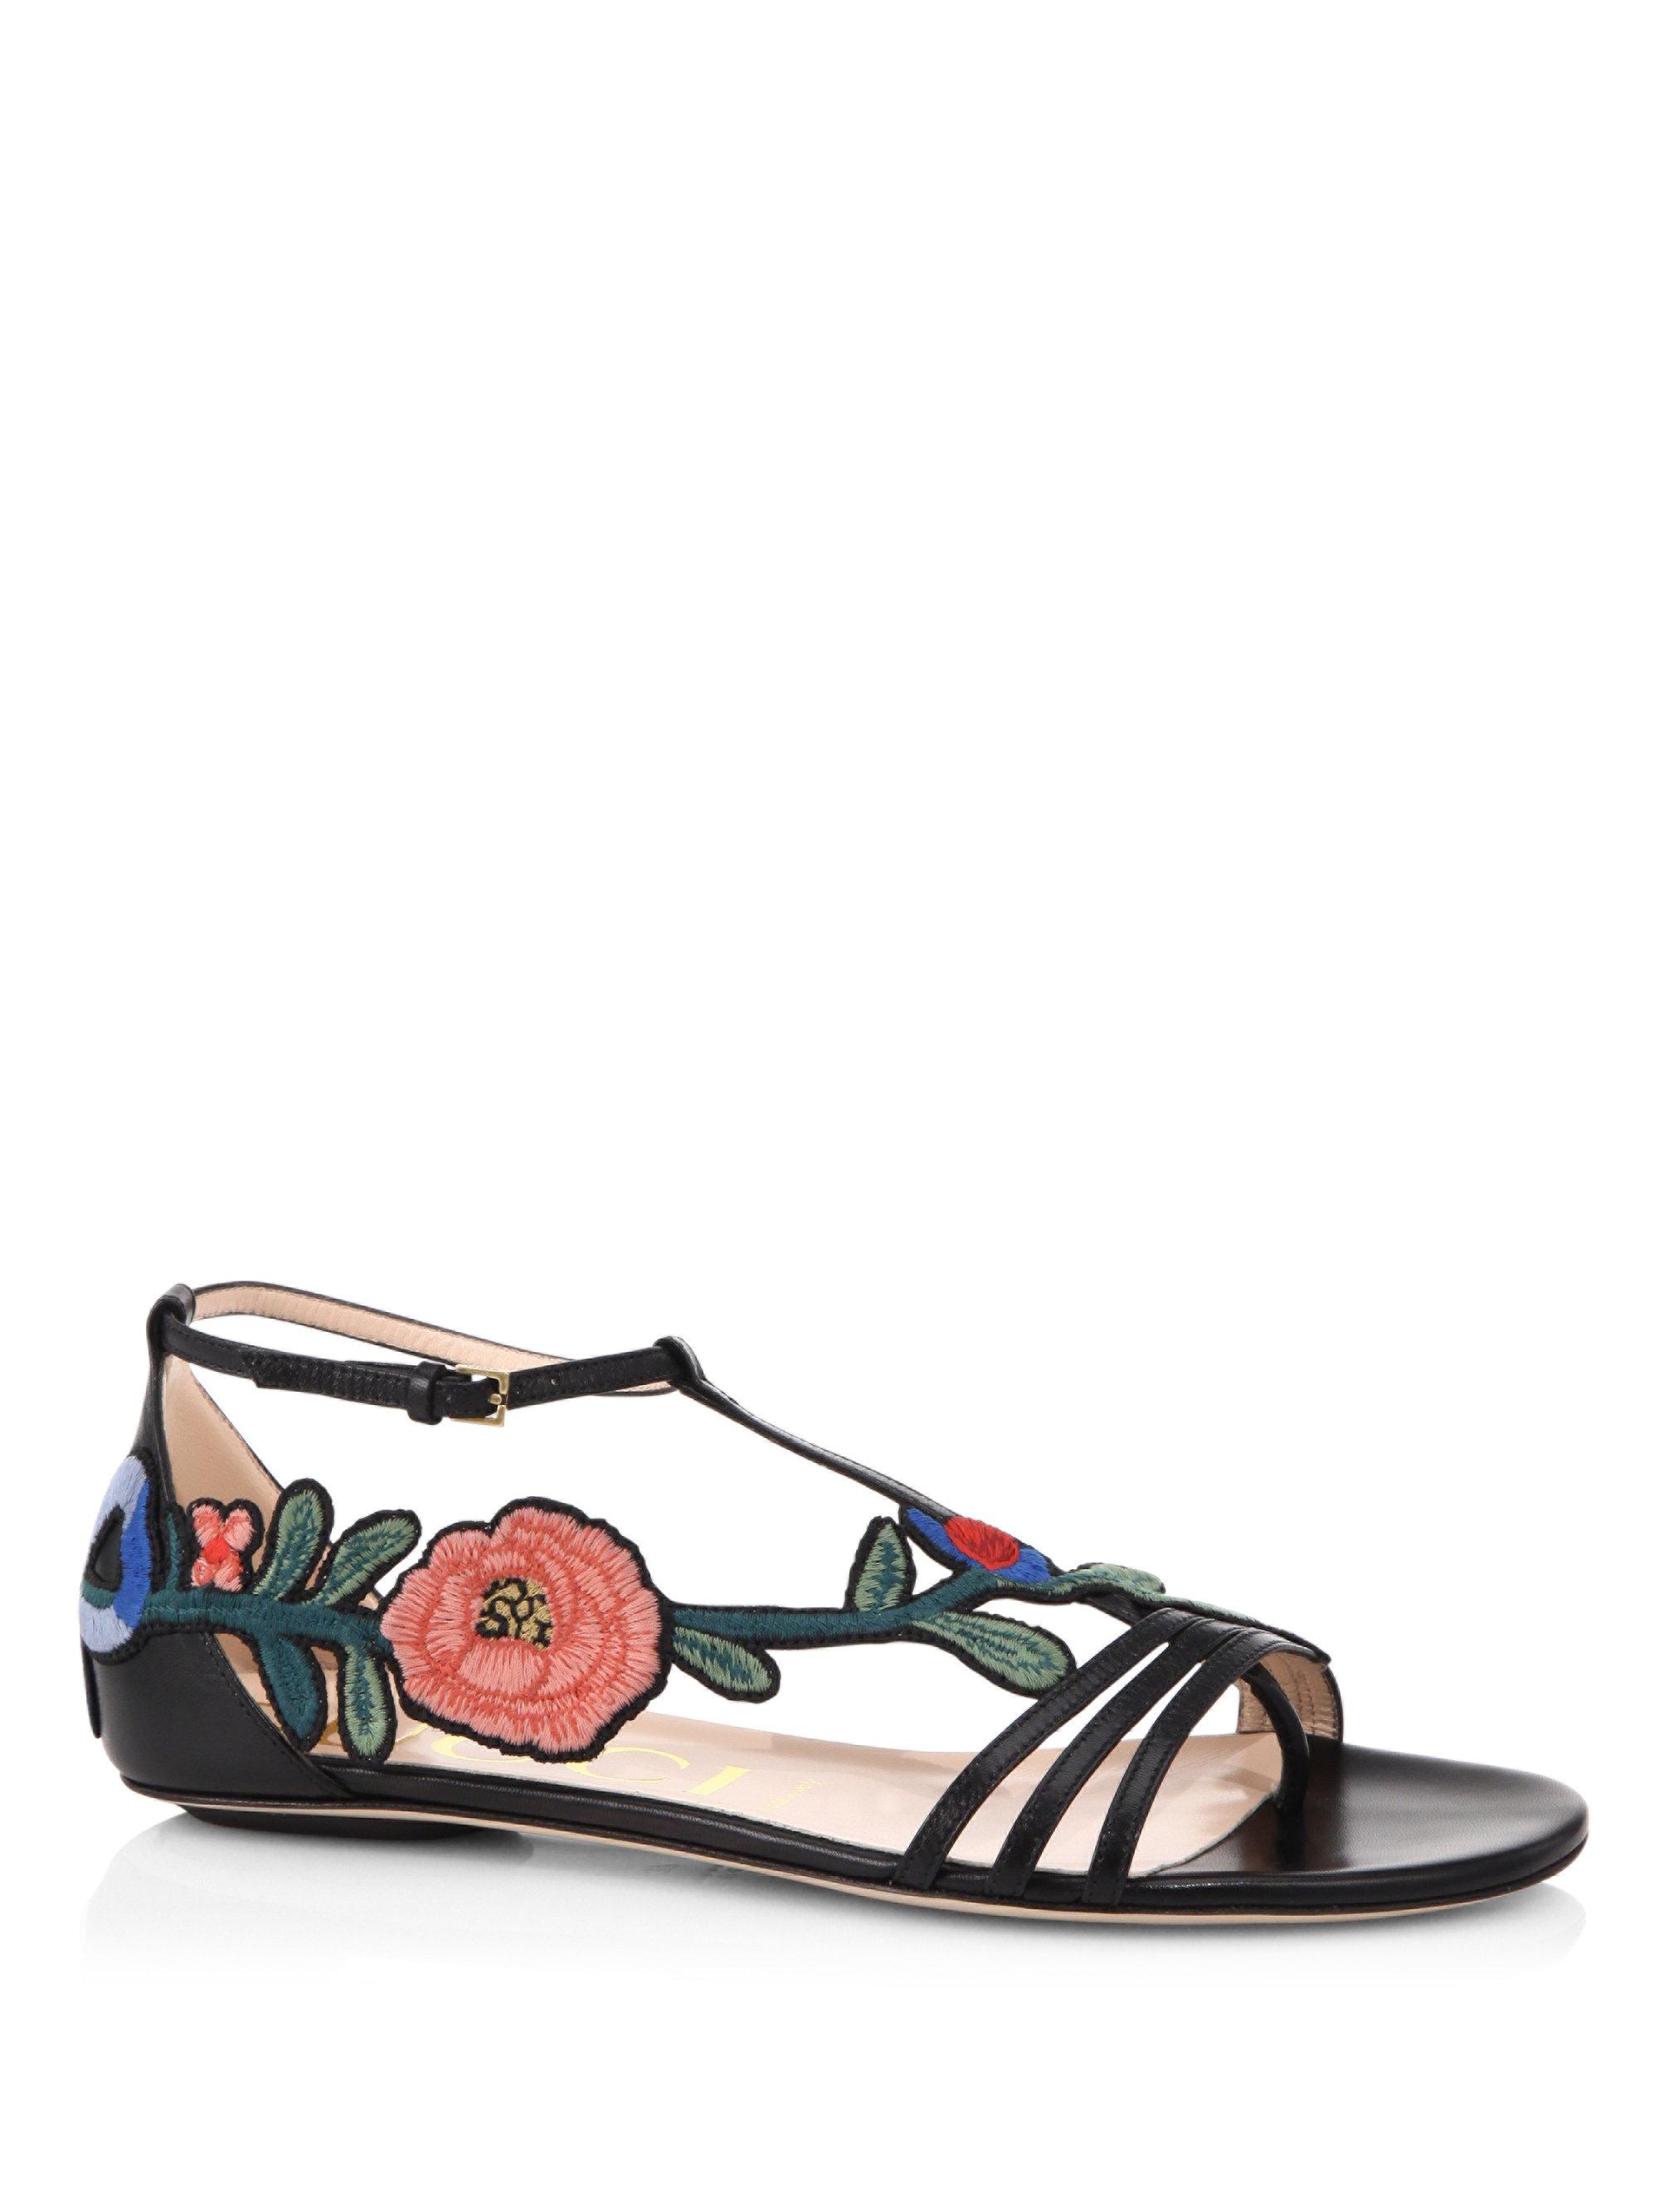 Gucci Ophelia Floral-embroidered Flat Sandals in Black | Lyst